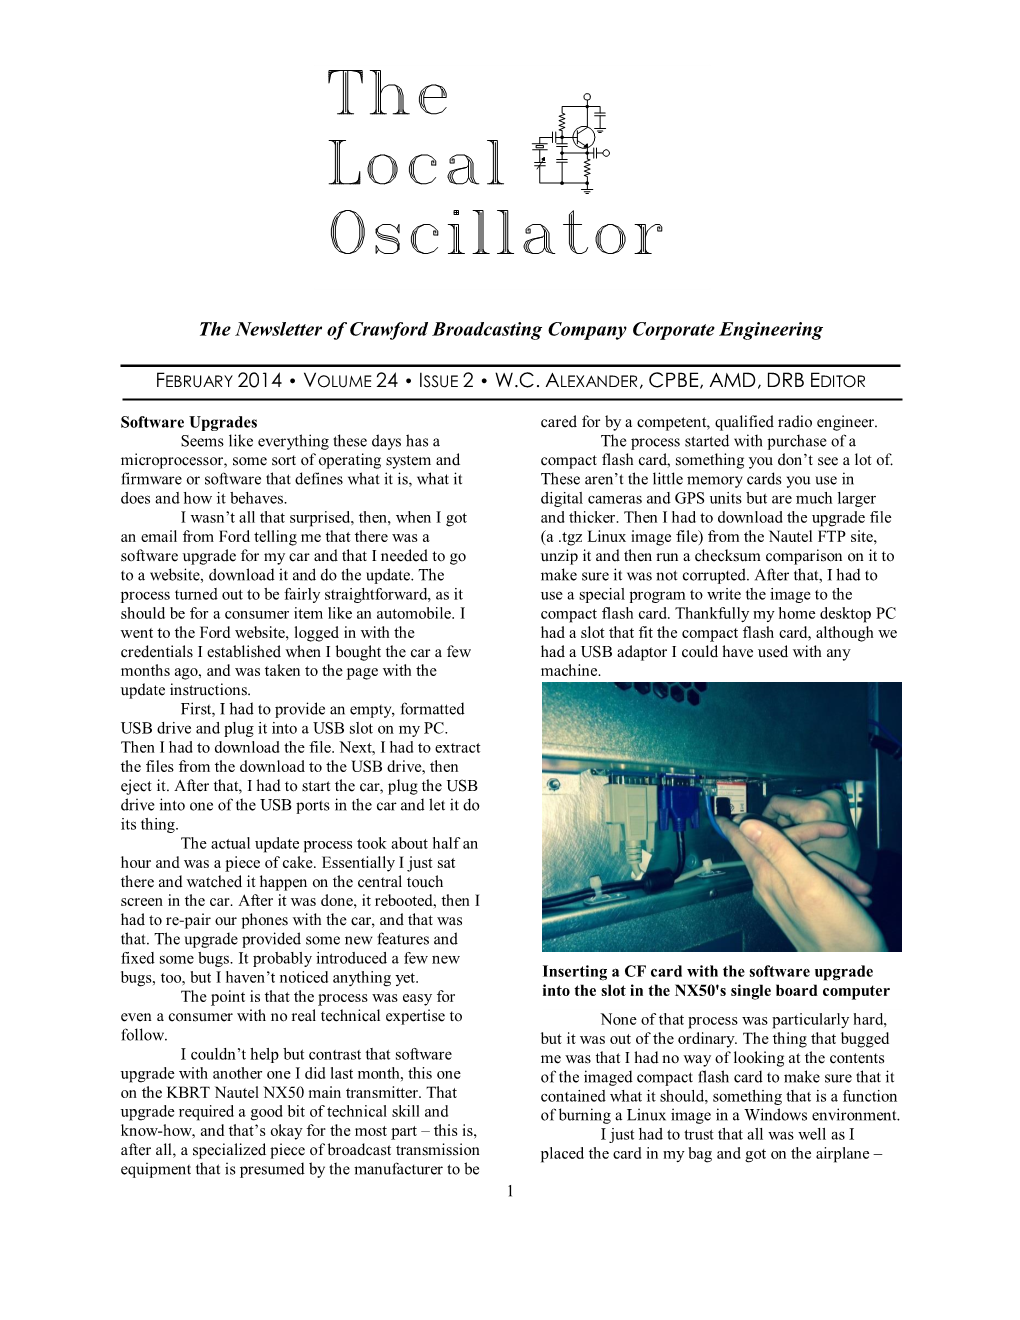 The Newsletter of Crawford Broadcasting Company Corporate Engineering